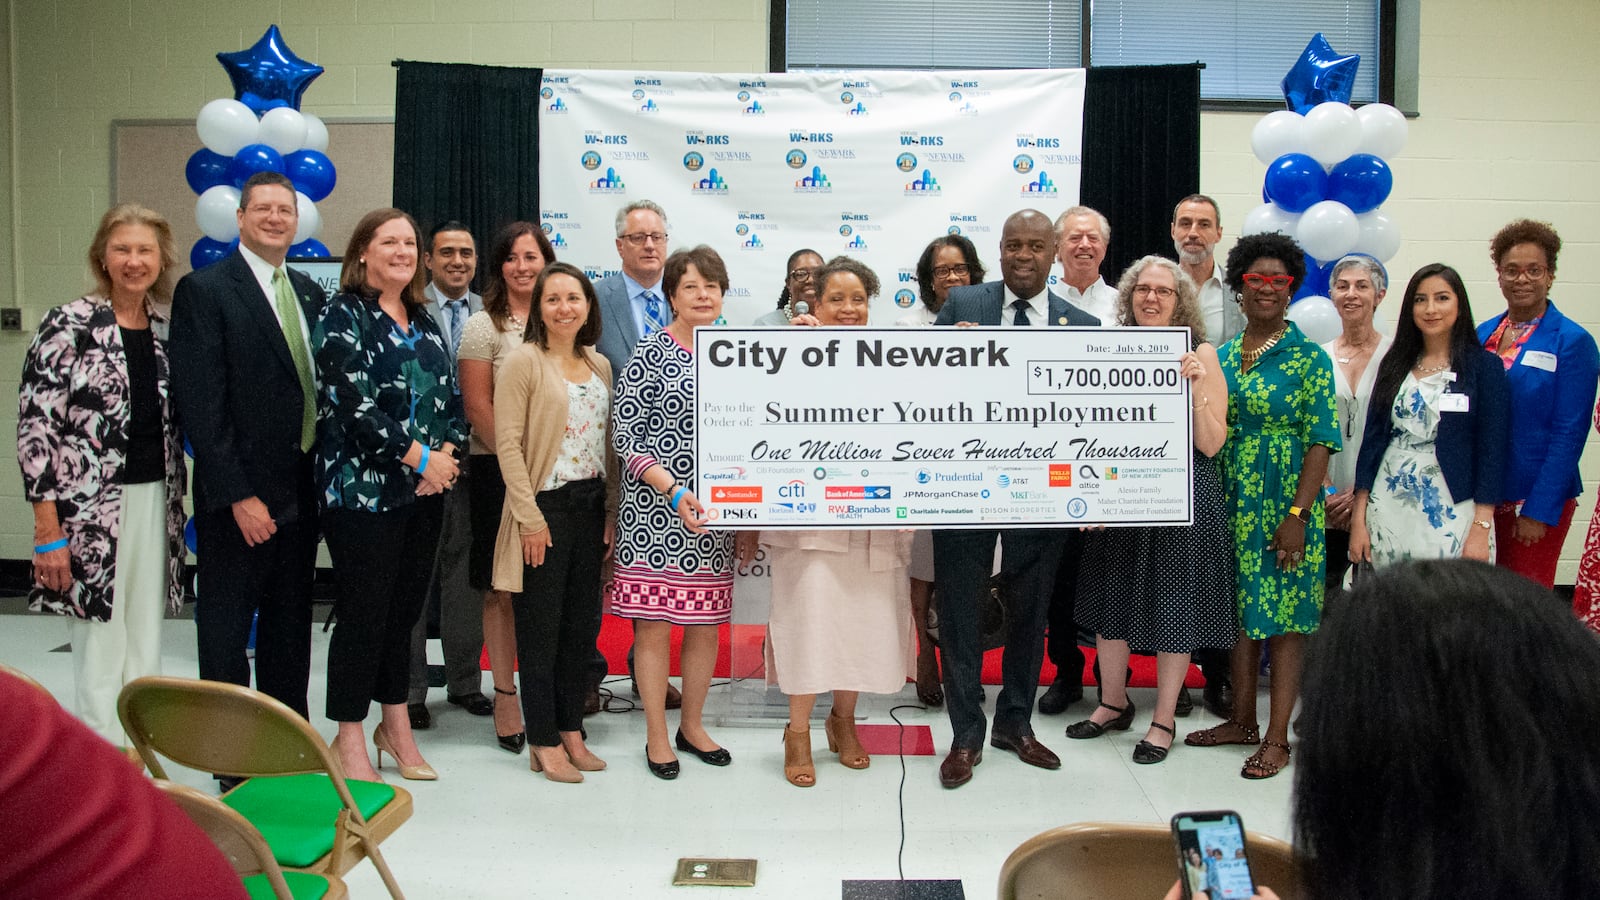 Through a public-private partnership, about $3 million in total was raised to support the city's summer youth employment program. Grant funds comprised $1.7 million of the amount.